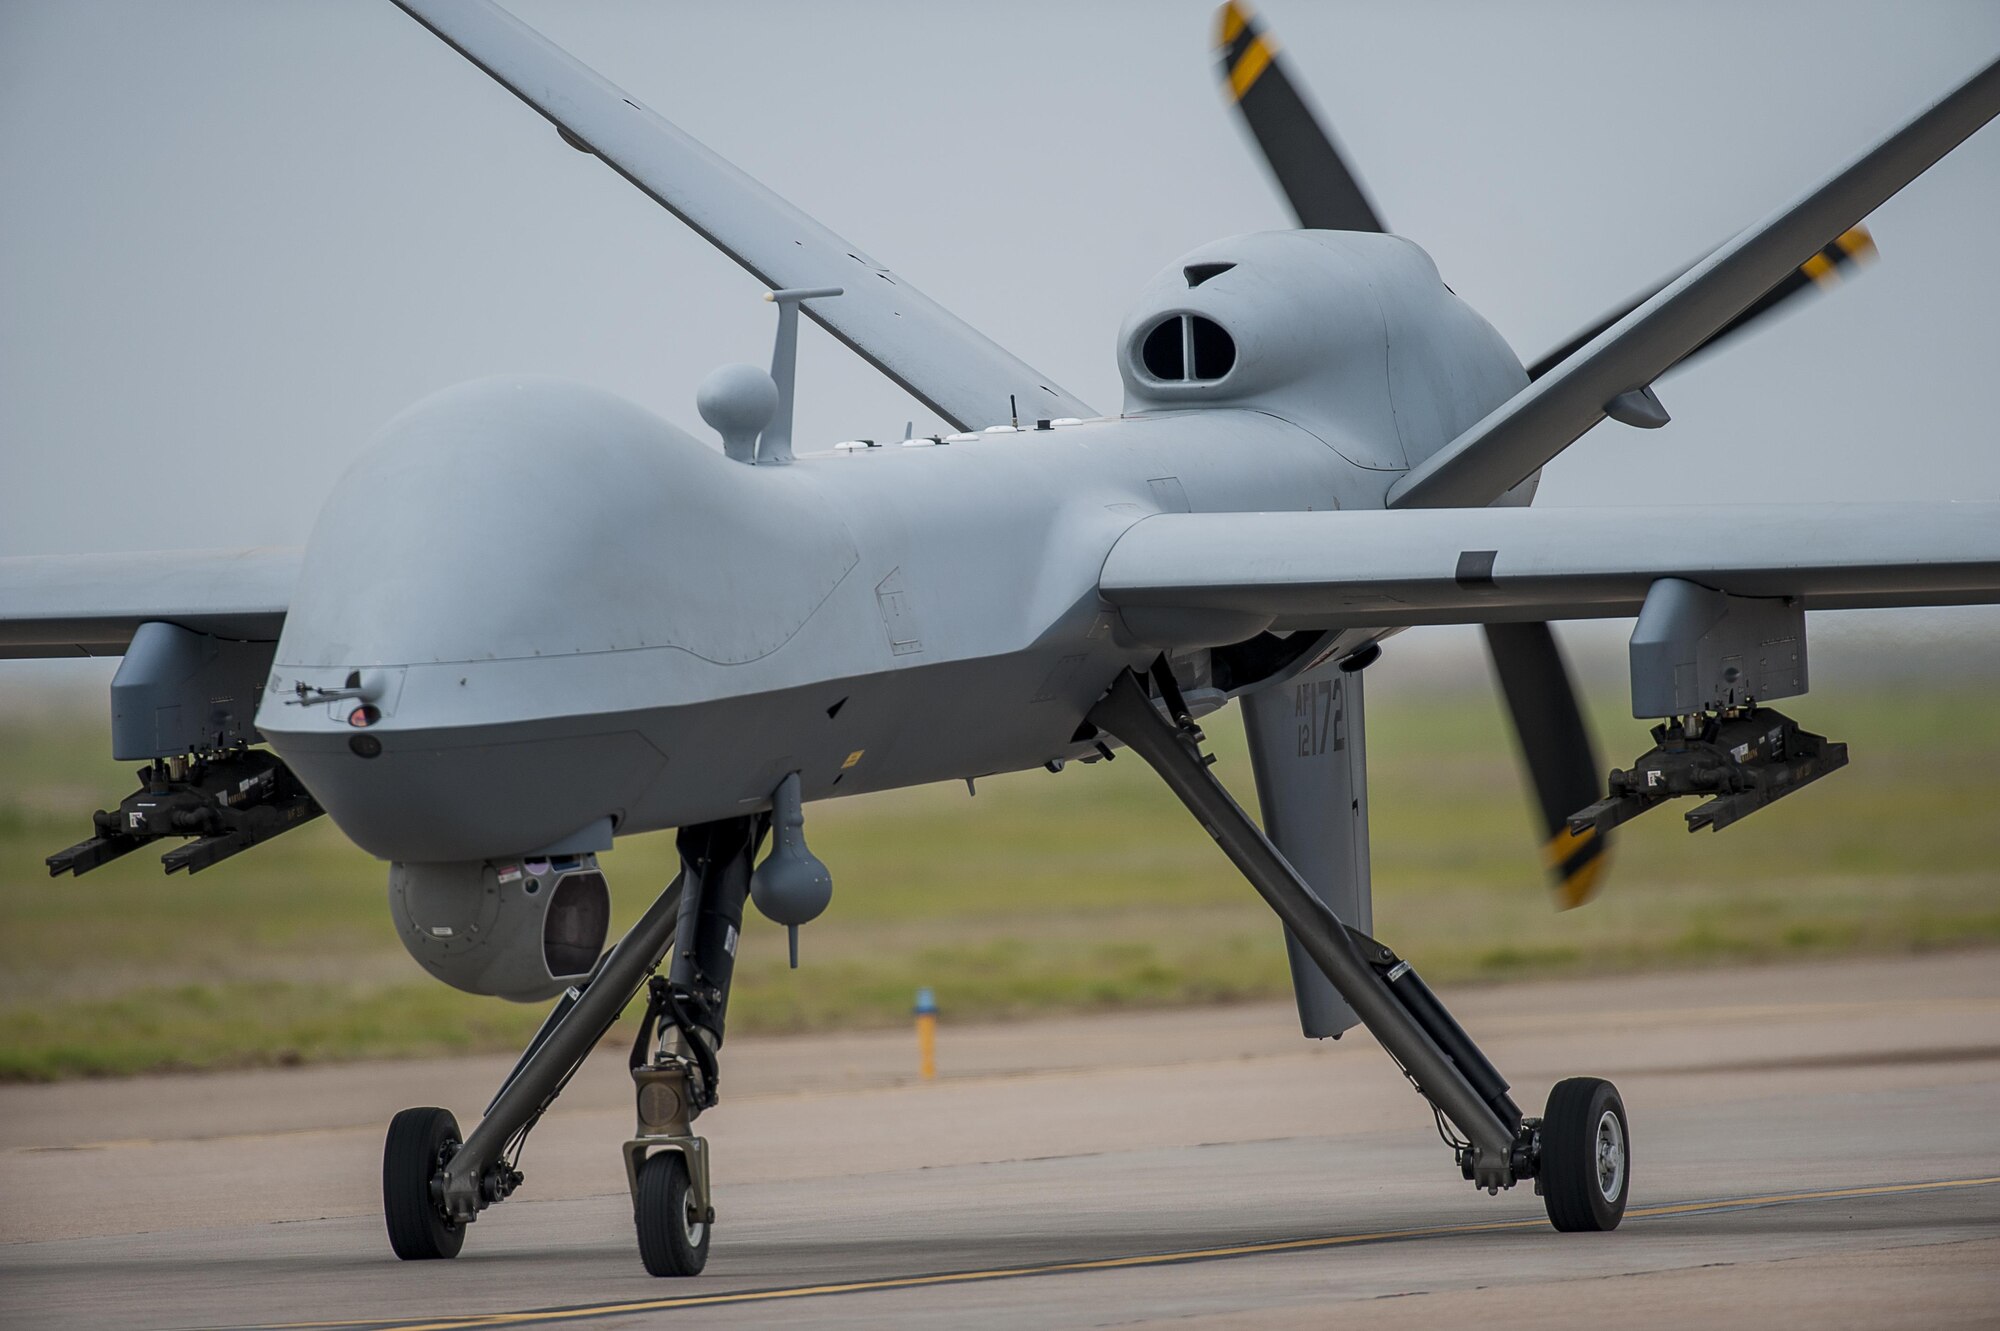 An MQ-9 Reaper performs a low pass during an air show demonstration May 29, 2016, at Cannon Air Force Base, N.M. The air show highlights the unique capabilities and qualities of Cannon's air commandos and also celebrates the long-standing relationship between the 27th Special Operations Wing and the local community.  (U.S. Air Force photo/Master Sgt. Dennis J. Henry Jr.)